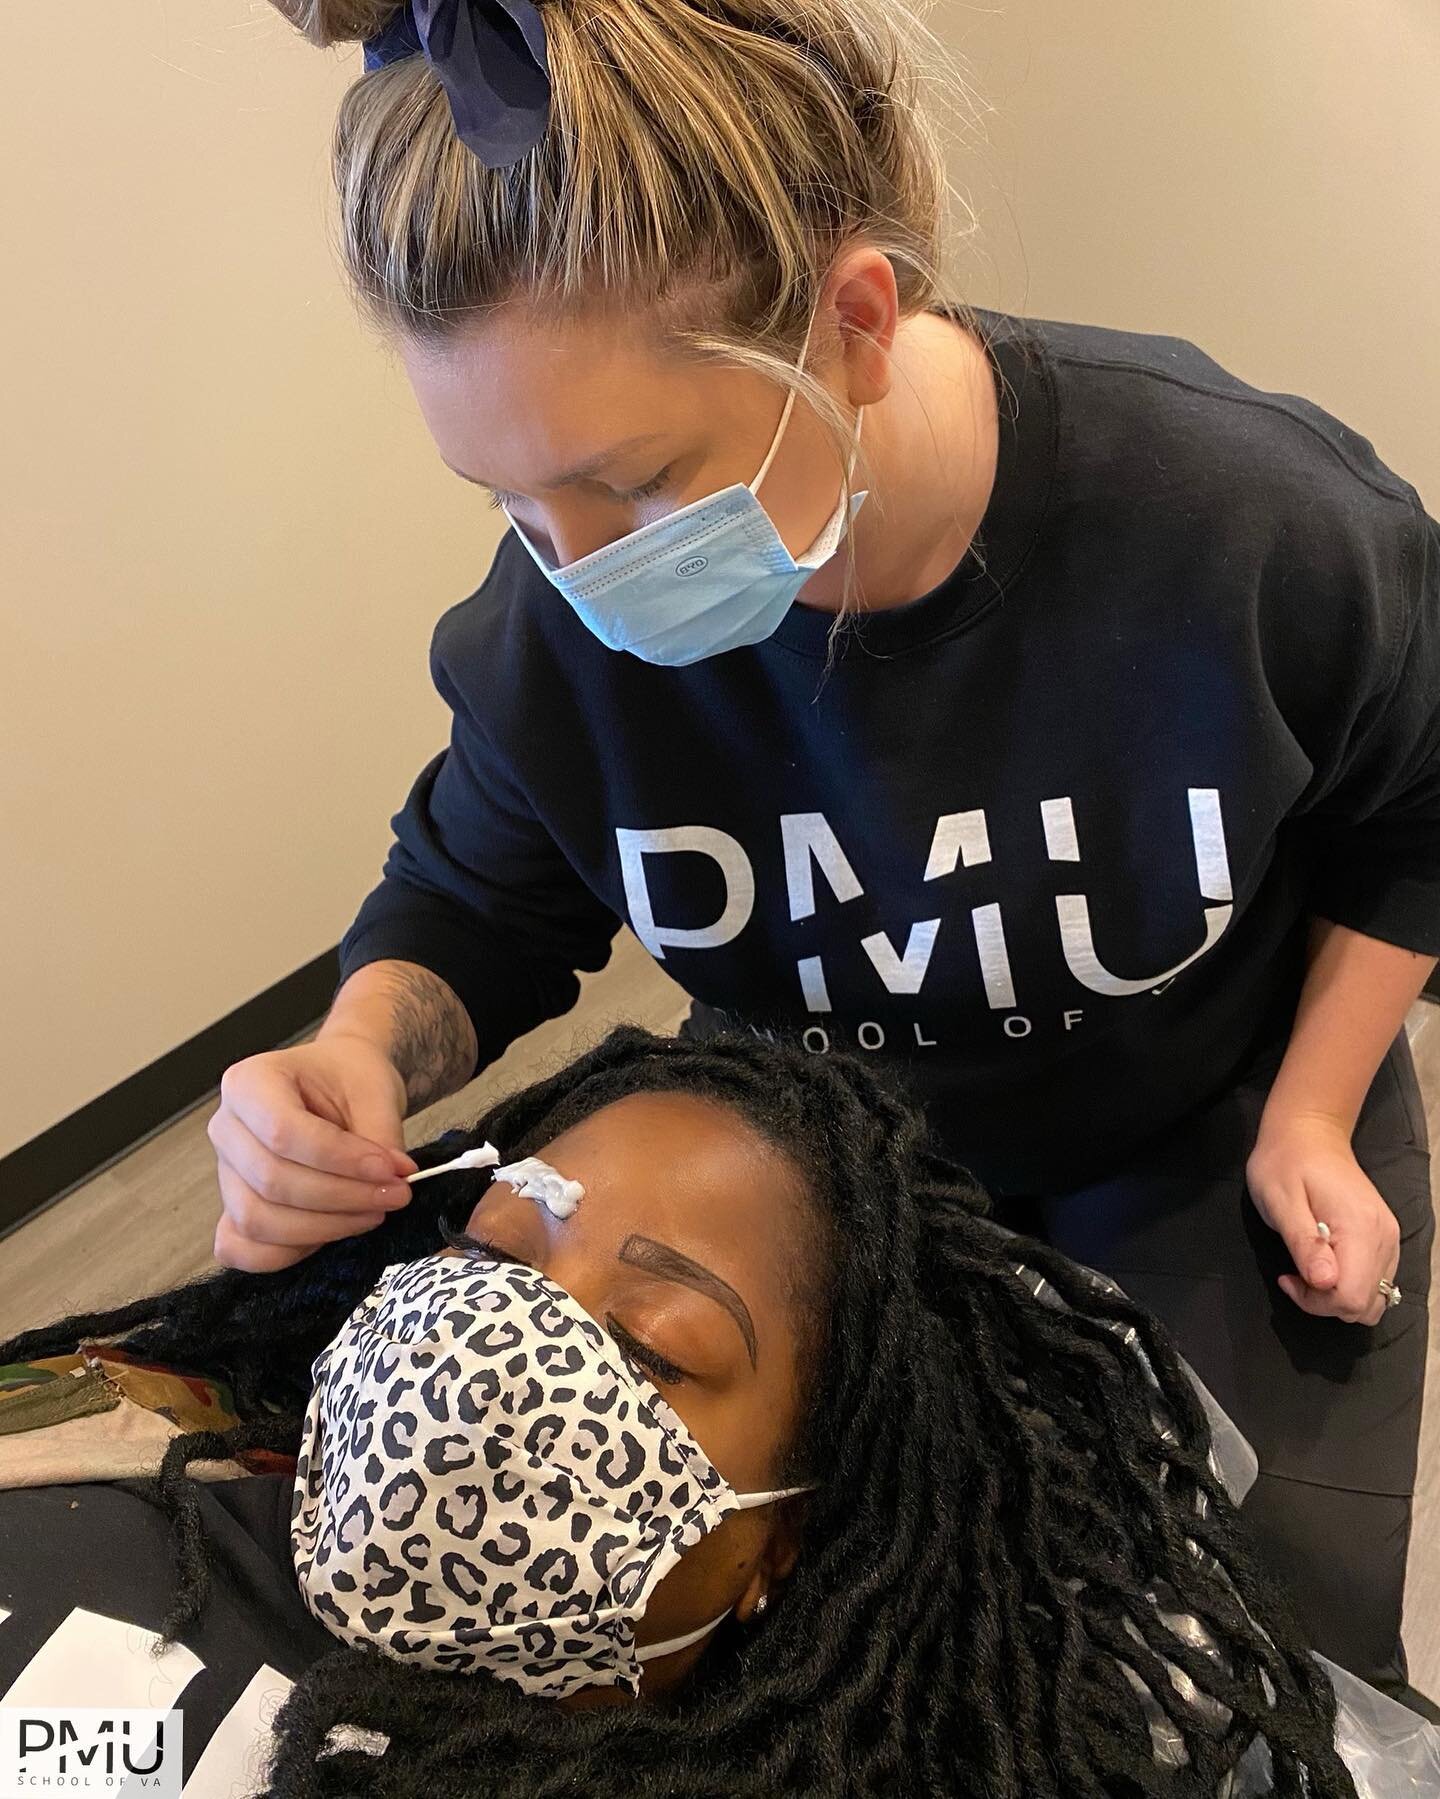 Finished Day 3 for this week of practicals on live models. So proud of all of our students&mdash;THEY DID SUCH A GREAT JOB!!!! 🥰

Here&rsquo;s a preview of our student @kristenhyt17 pre-numbing her model with anesthetic prior to the procedure. Look 